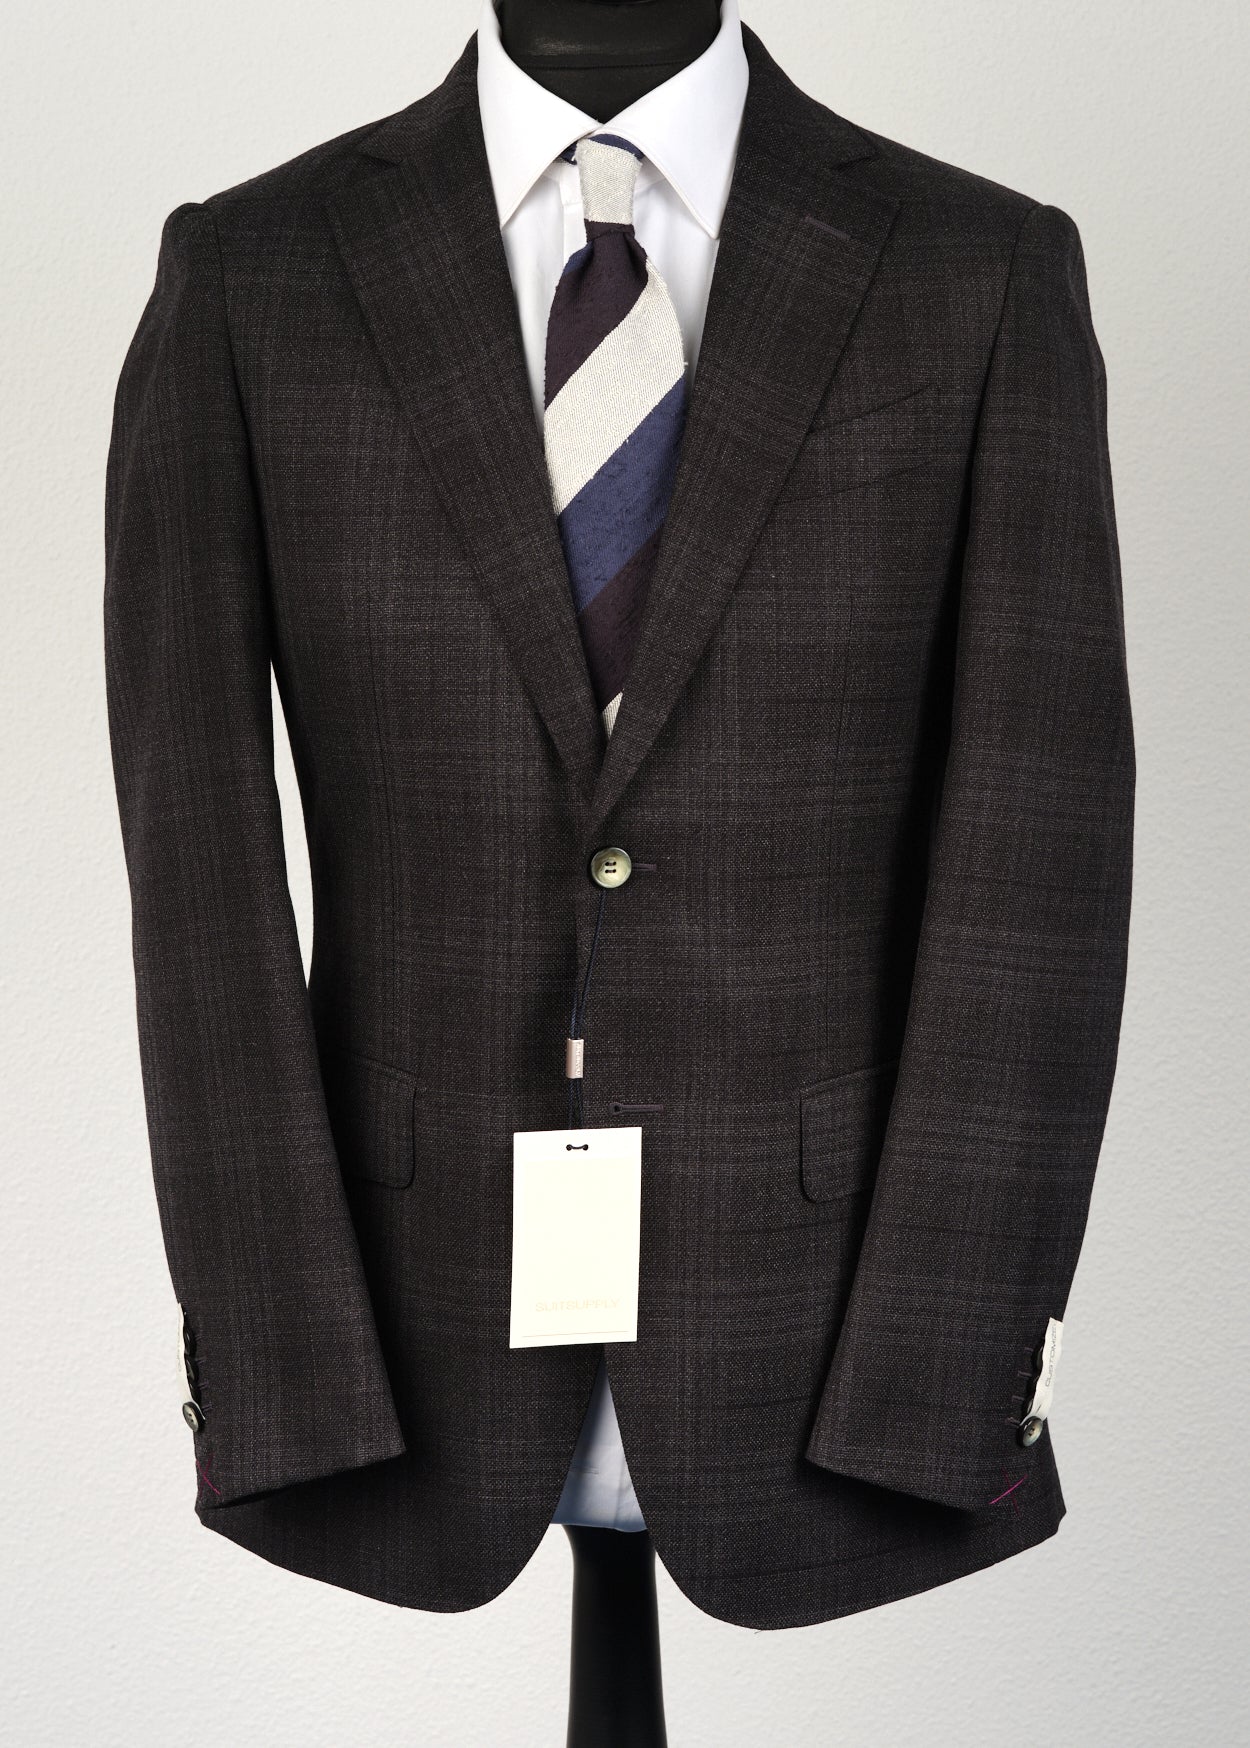 New Suitsupply Sienna Black Check Pure Wool Blazer - Size 44S (Regular Fit)